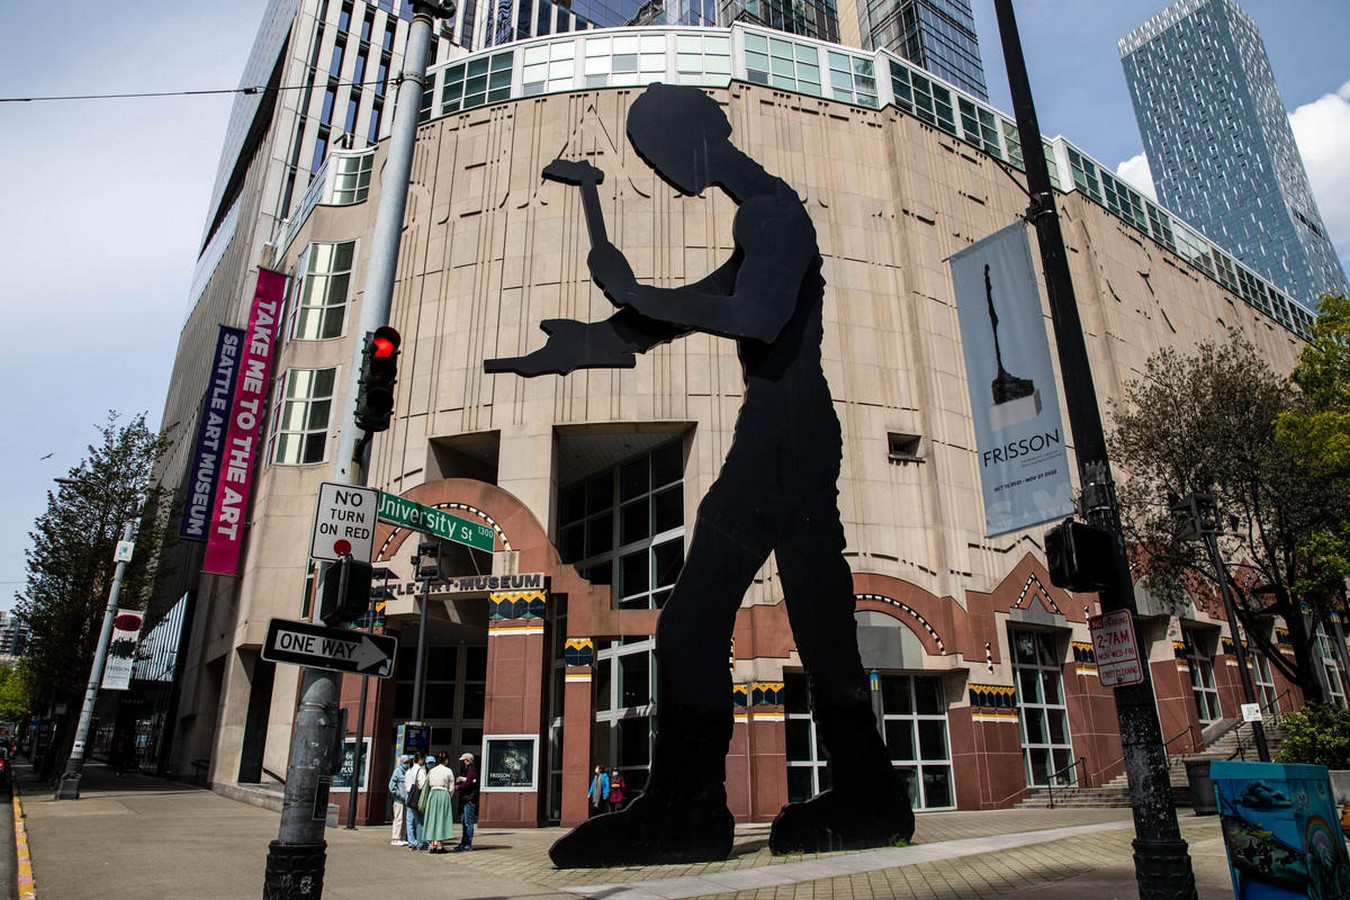 Amanda Snyder/Cross cut. Seattle Art Museum and the “Hammering man”. _©https://crosscut.com/culture/2022/05/seattle-art-museum-security-guards-join-wave-union-efforts).